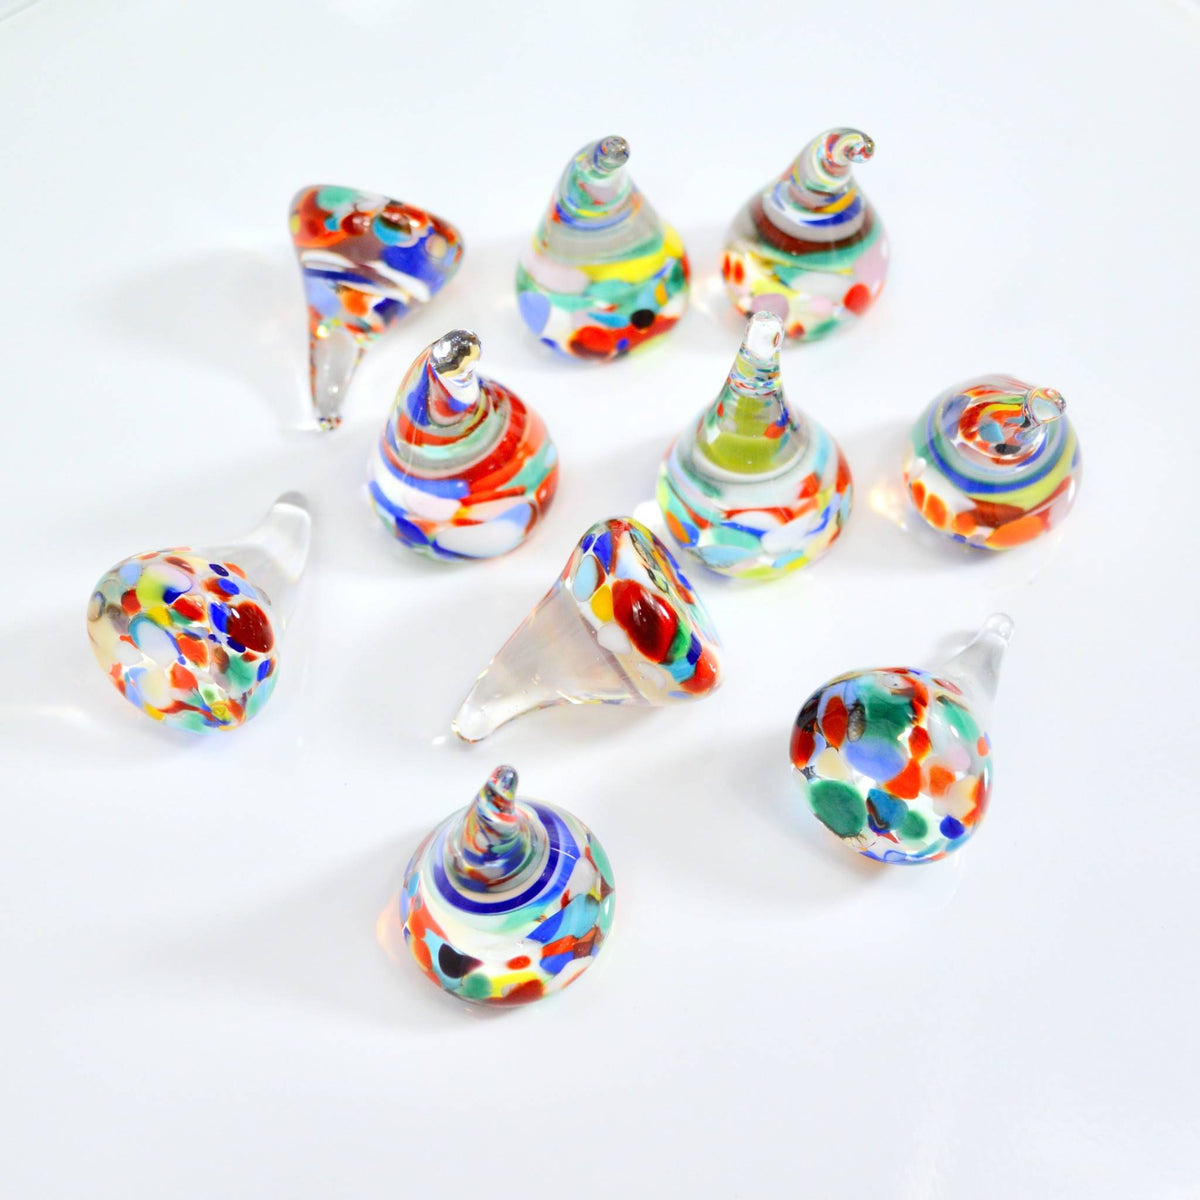 Murano Glass Candy Kisses Set of 3, 5, or 10, Made in Italy - My Italian Decor